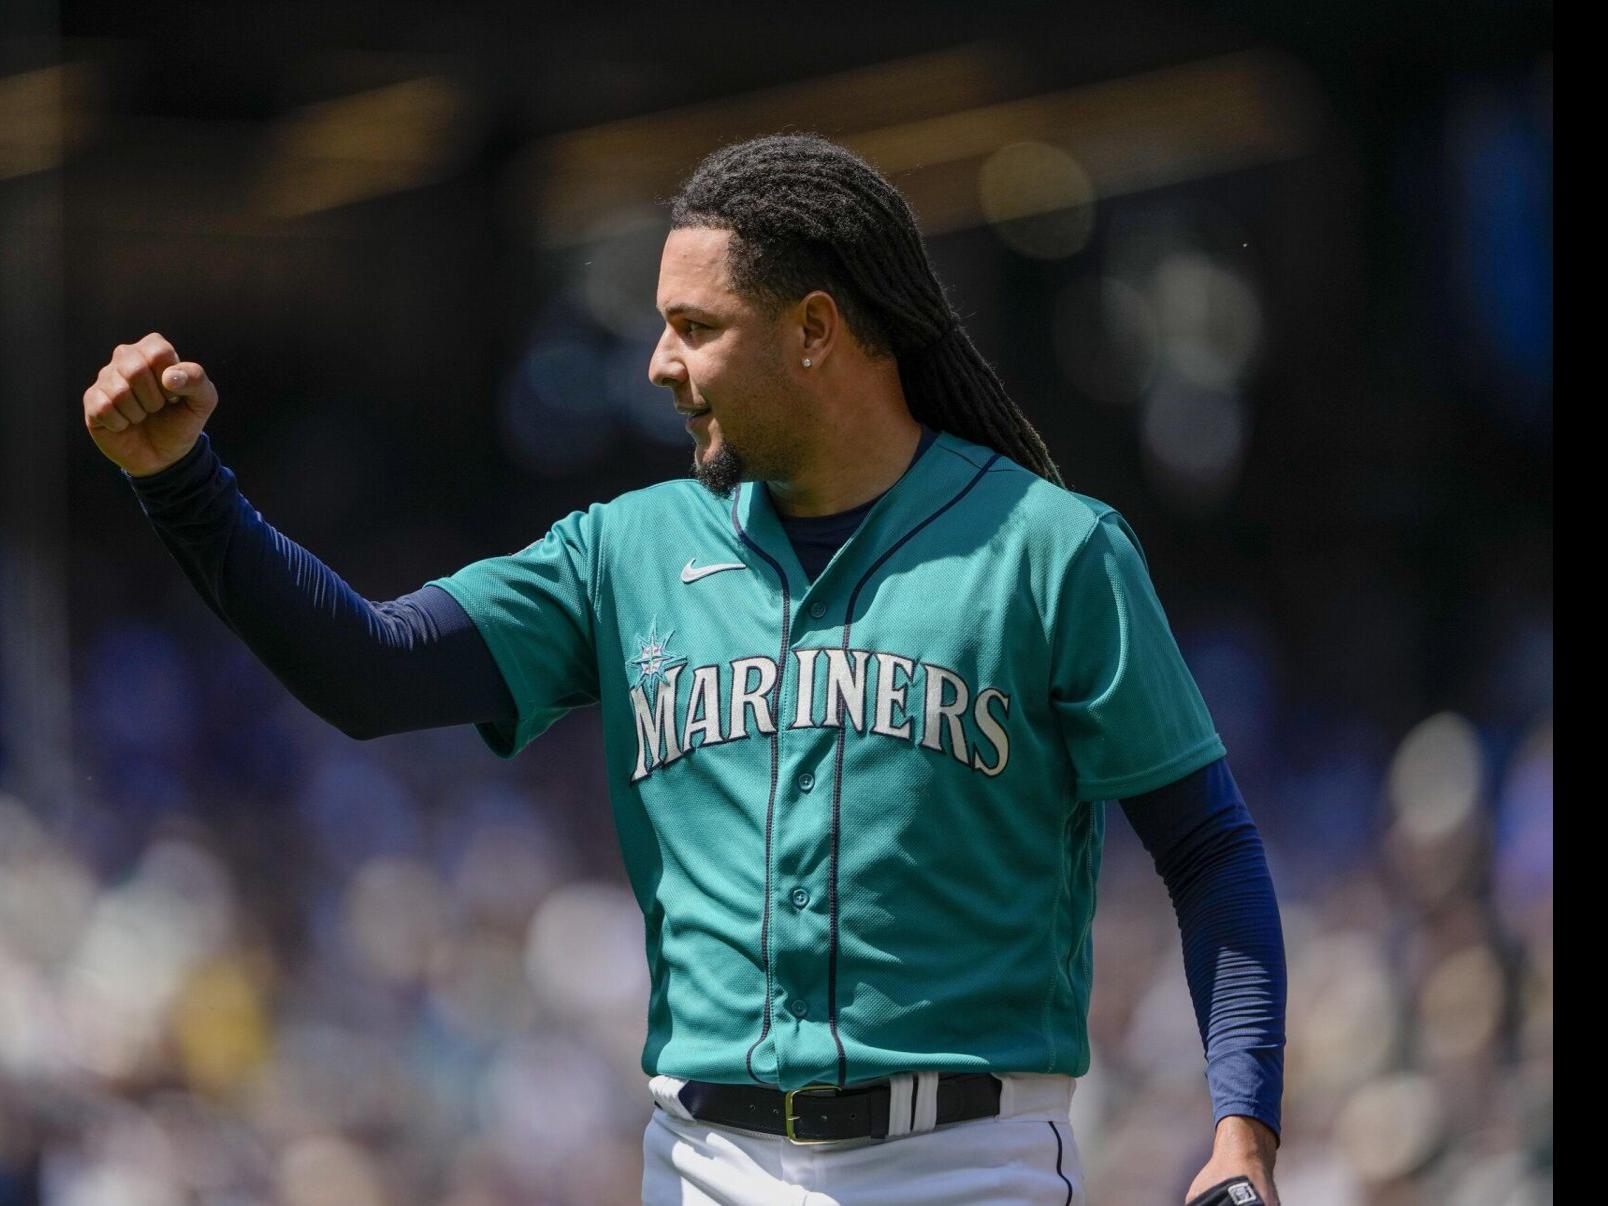 Luis Castillo shuts down Pirates with ease as Mariners coast to victory, Mariners